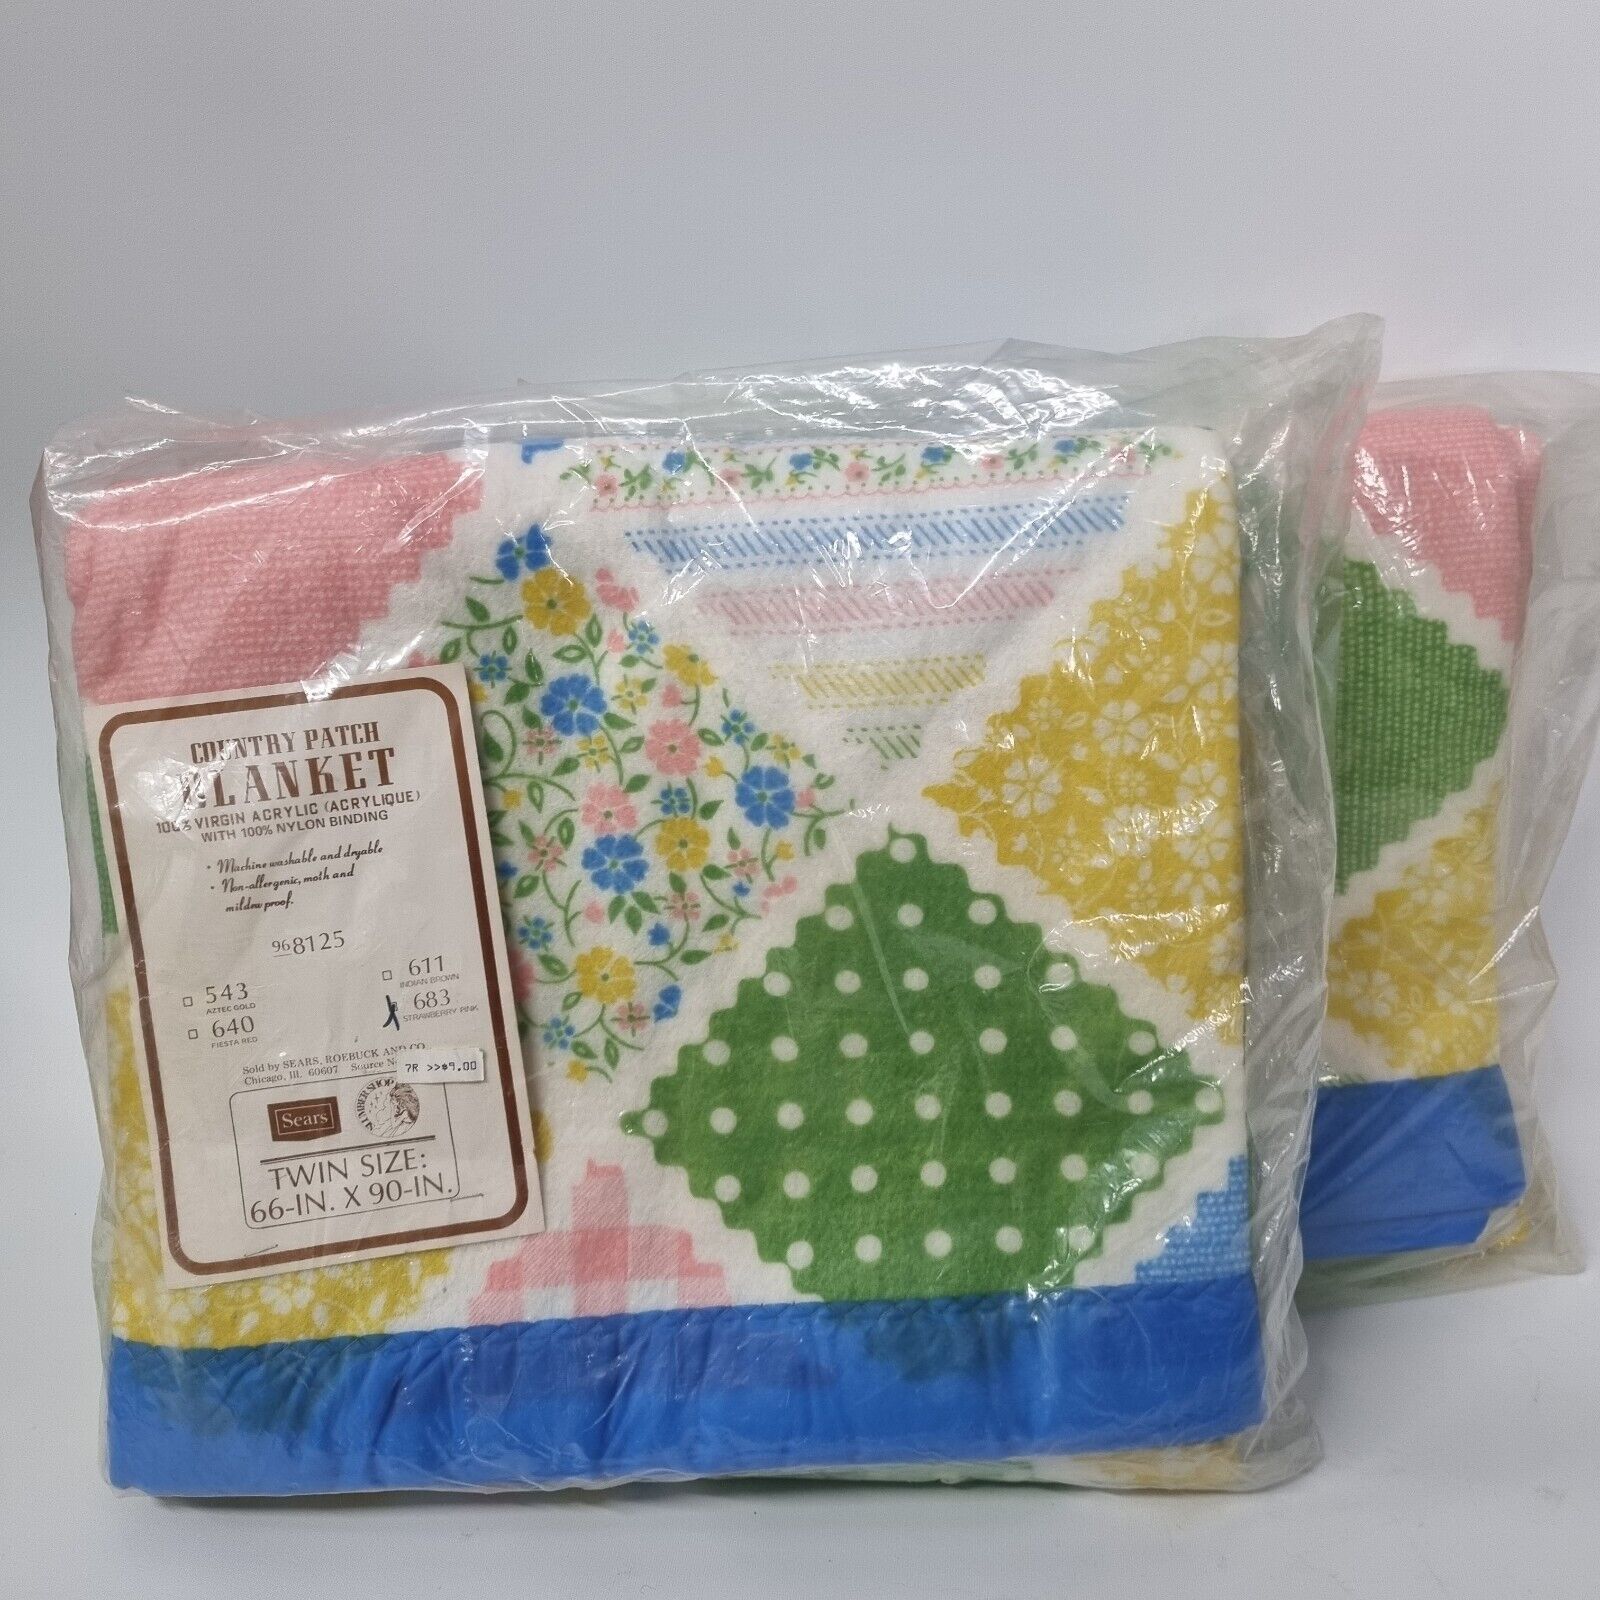 Set 2 NWT VTG Sears Country Patch Blanket Strawberry Pink Acrylic Satin New Twin